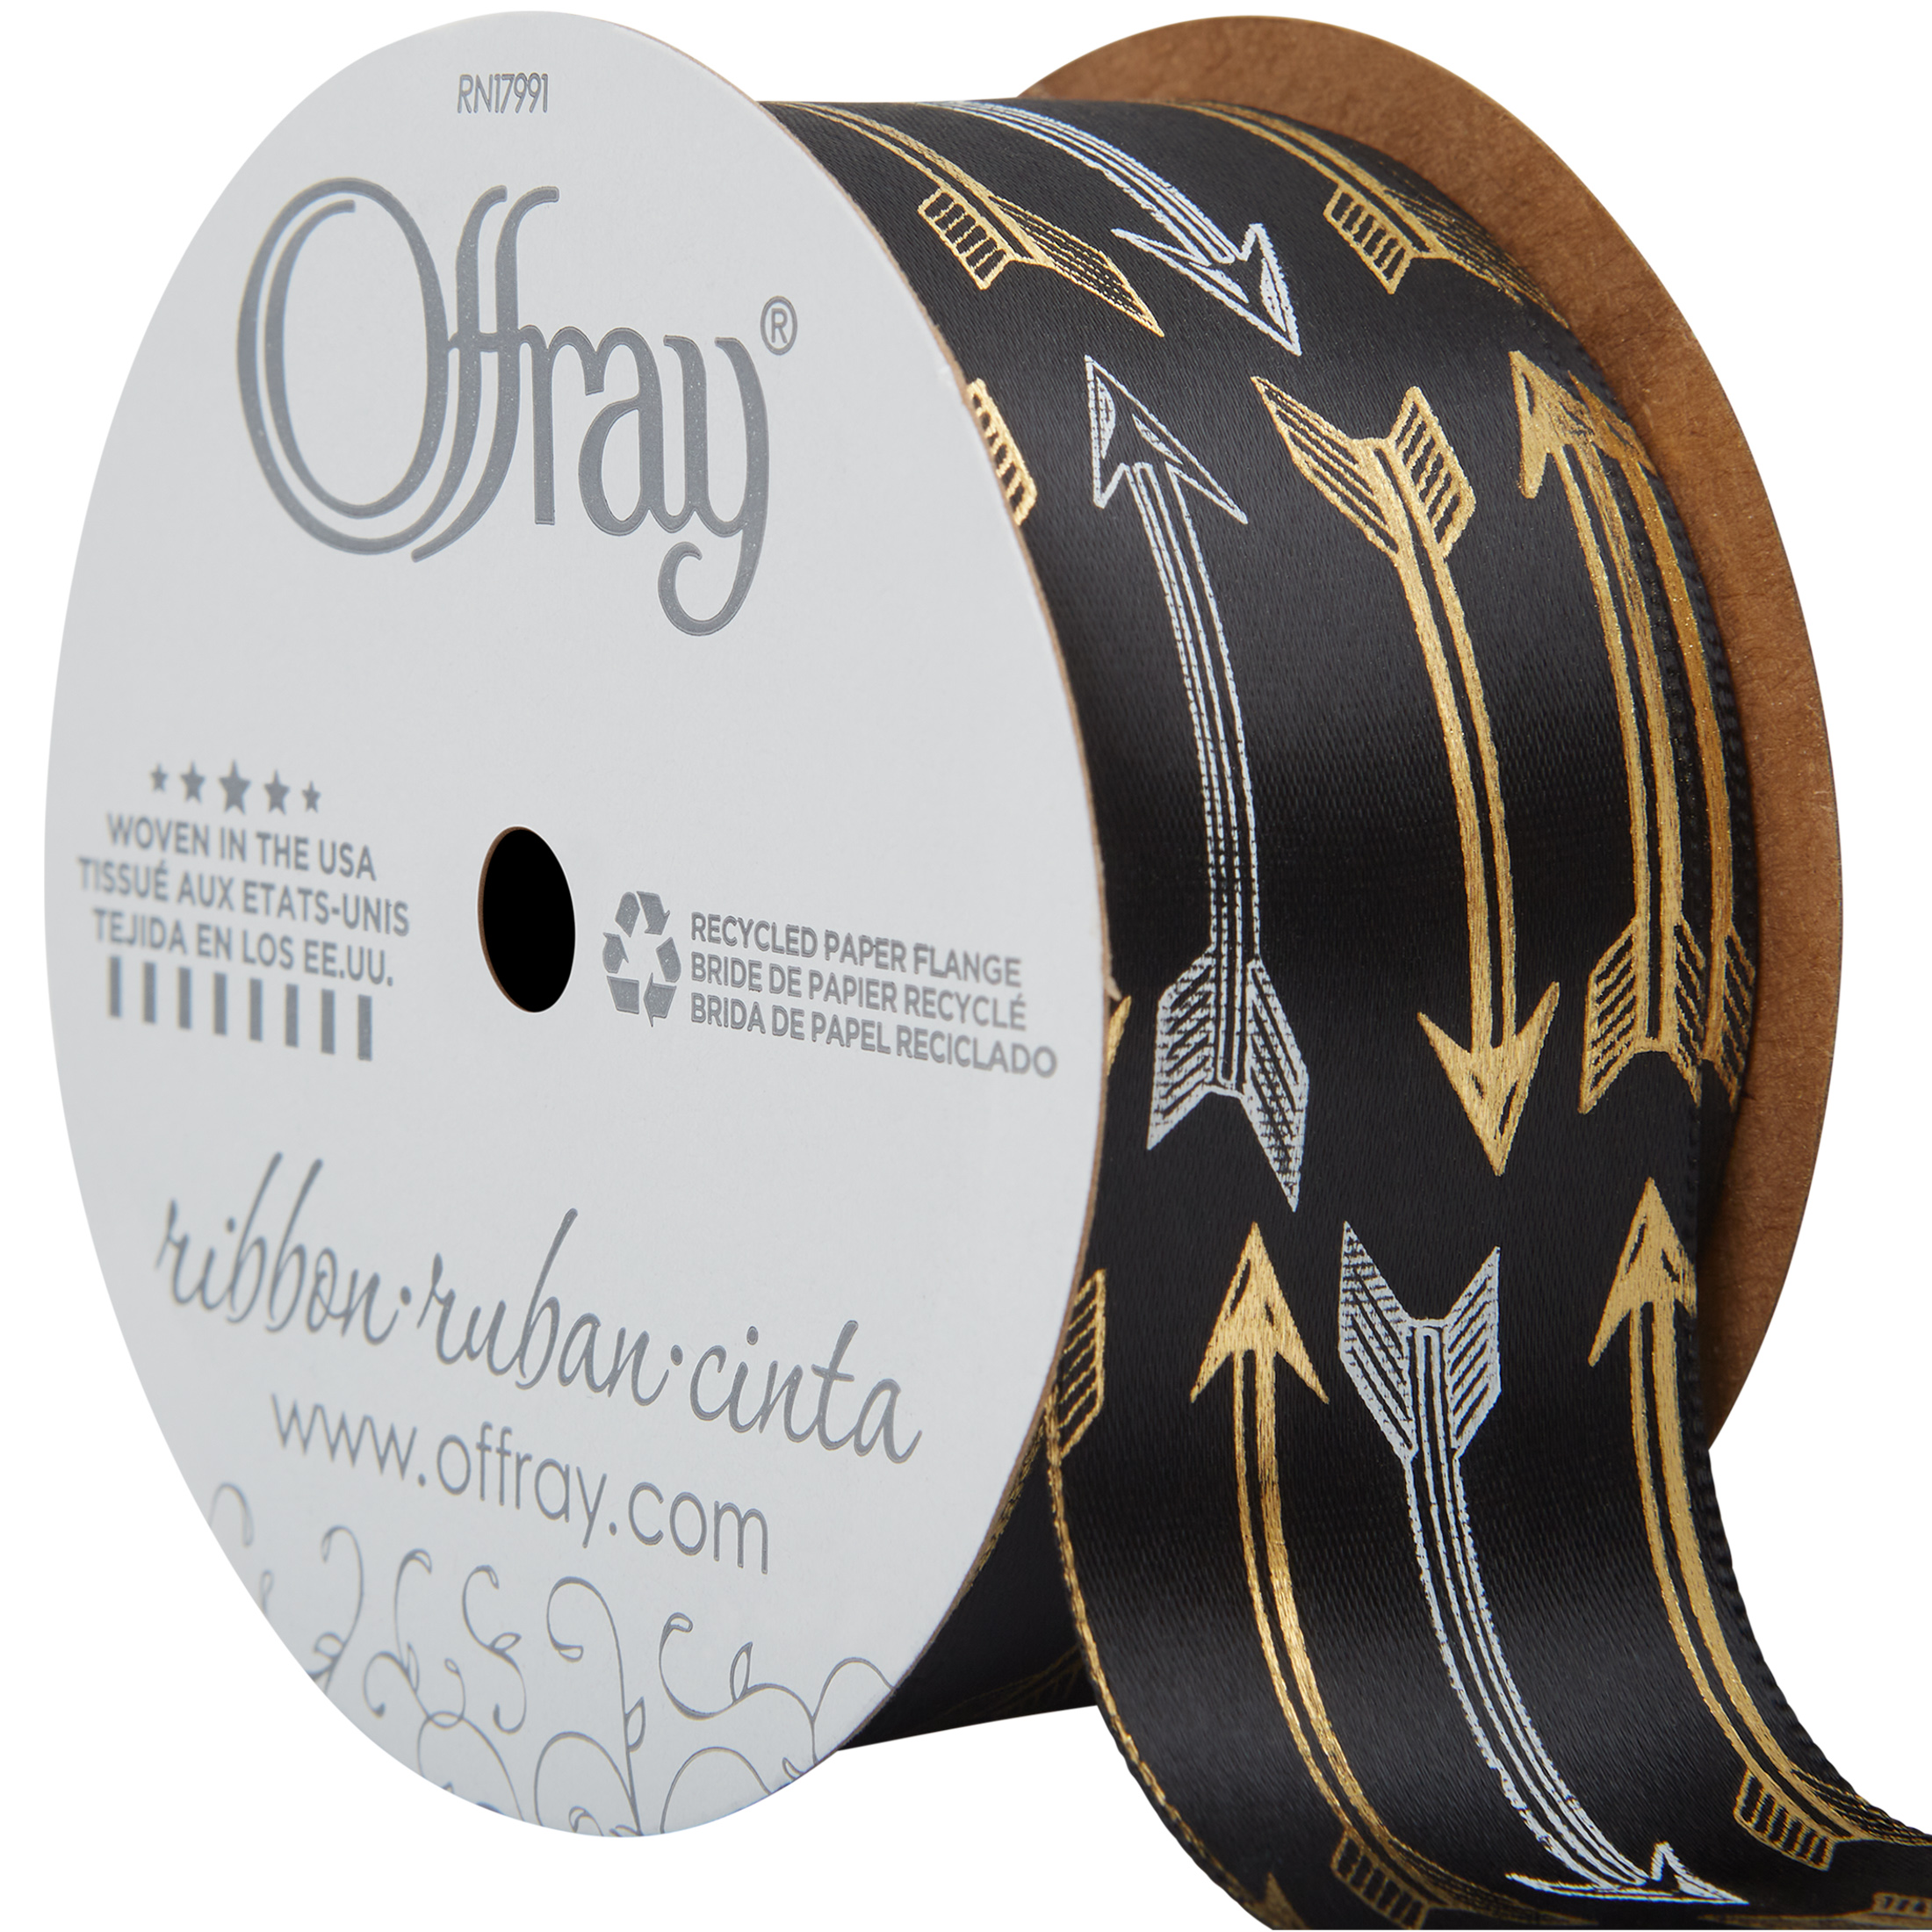 Offray Ribbon, Black 1 1/2 inch Arrows Satin Ribbon for Sewing, Crafts, and  Gifting, 9 feet, 1 Each 